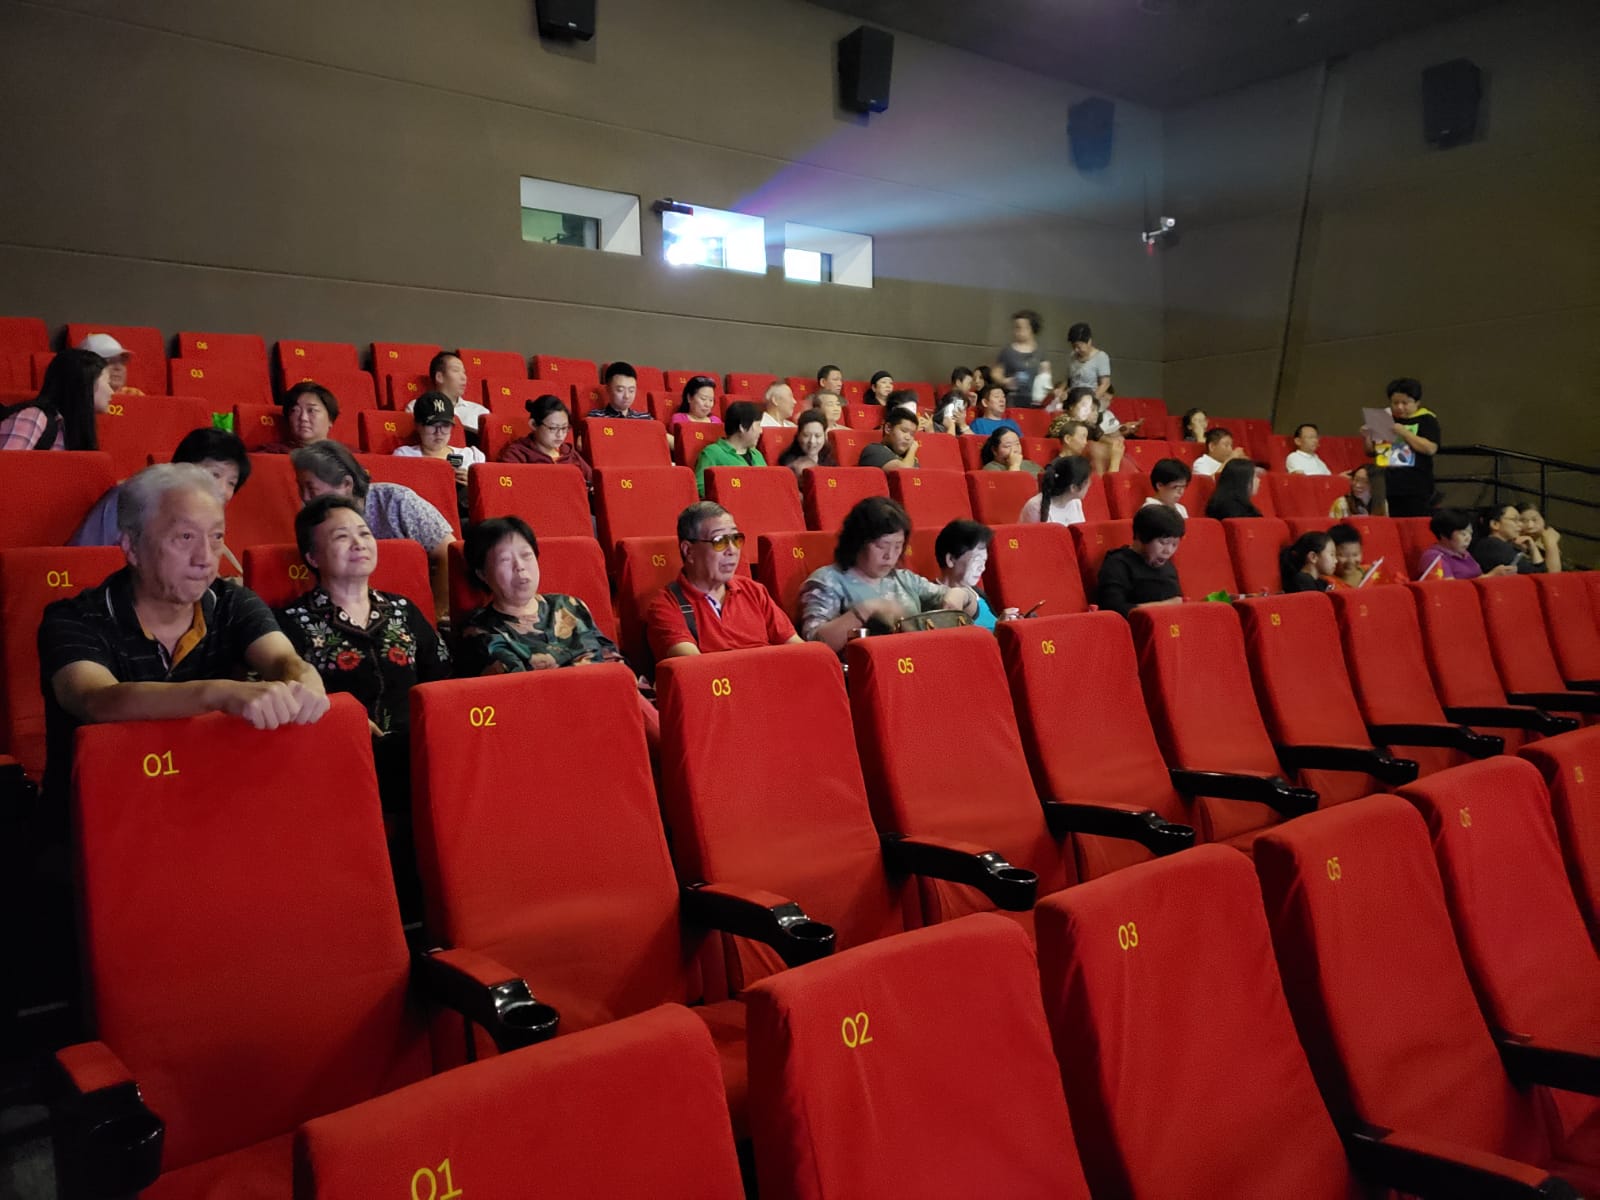 Moviegoers at a cinema in Beijing, China, on October 1, 2019.